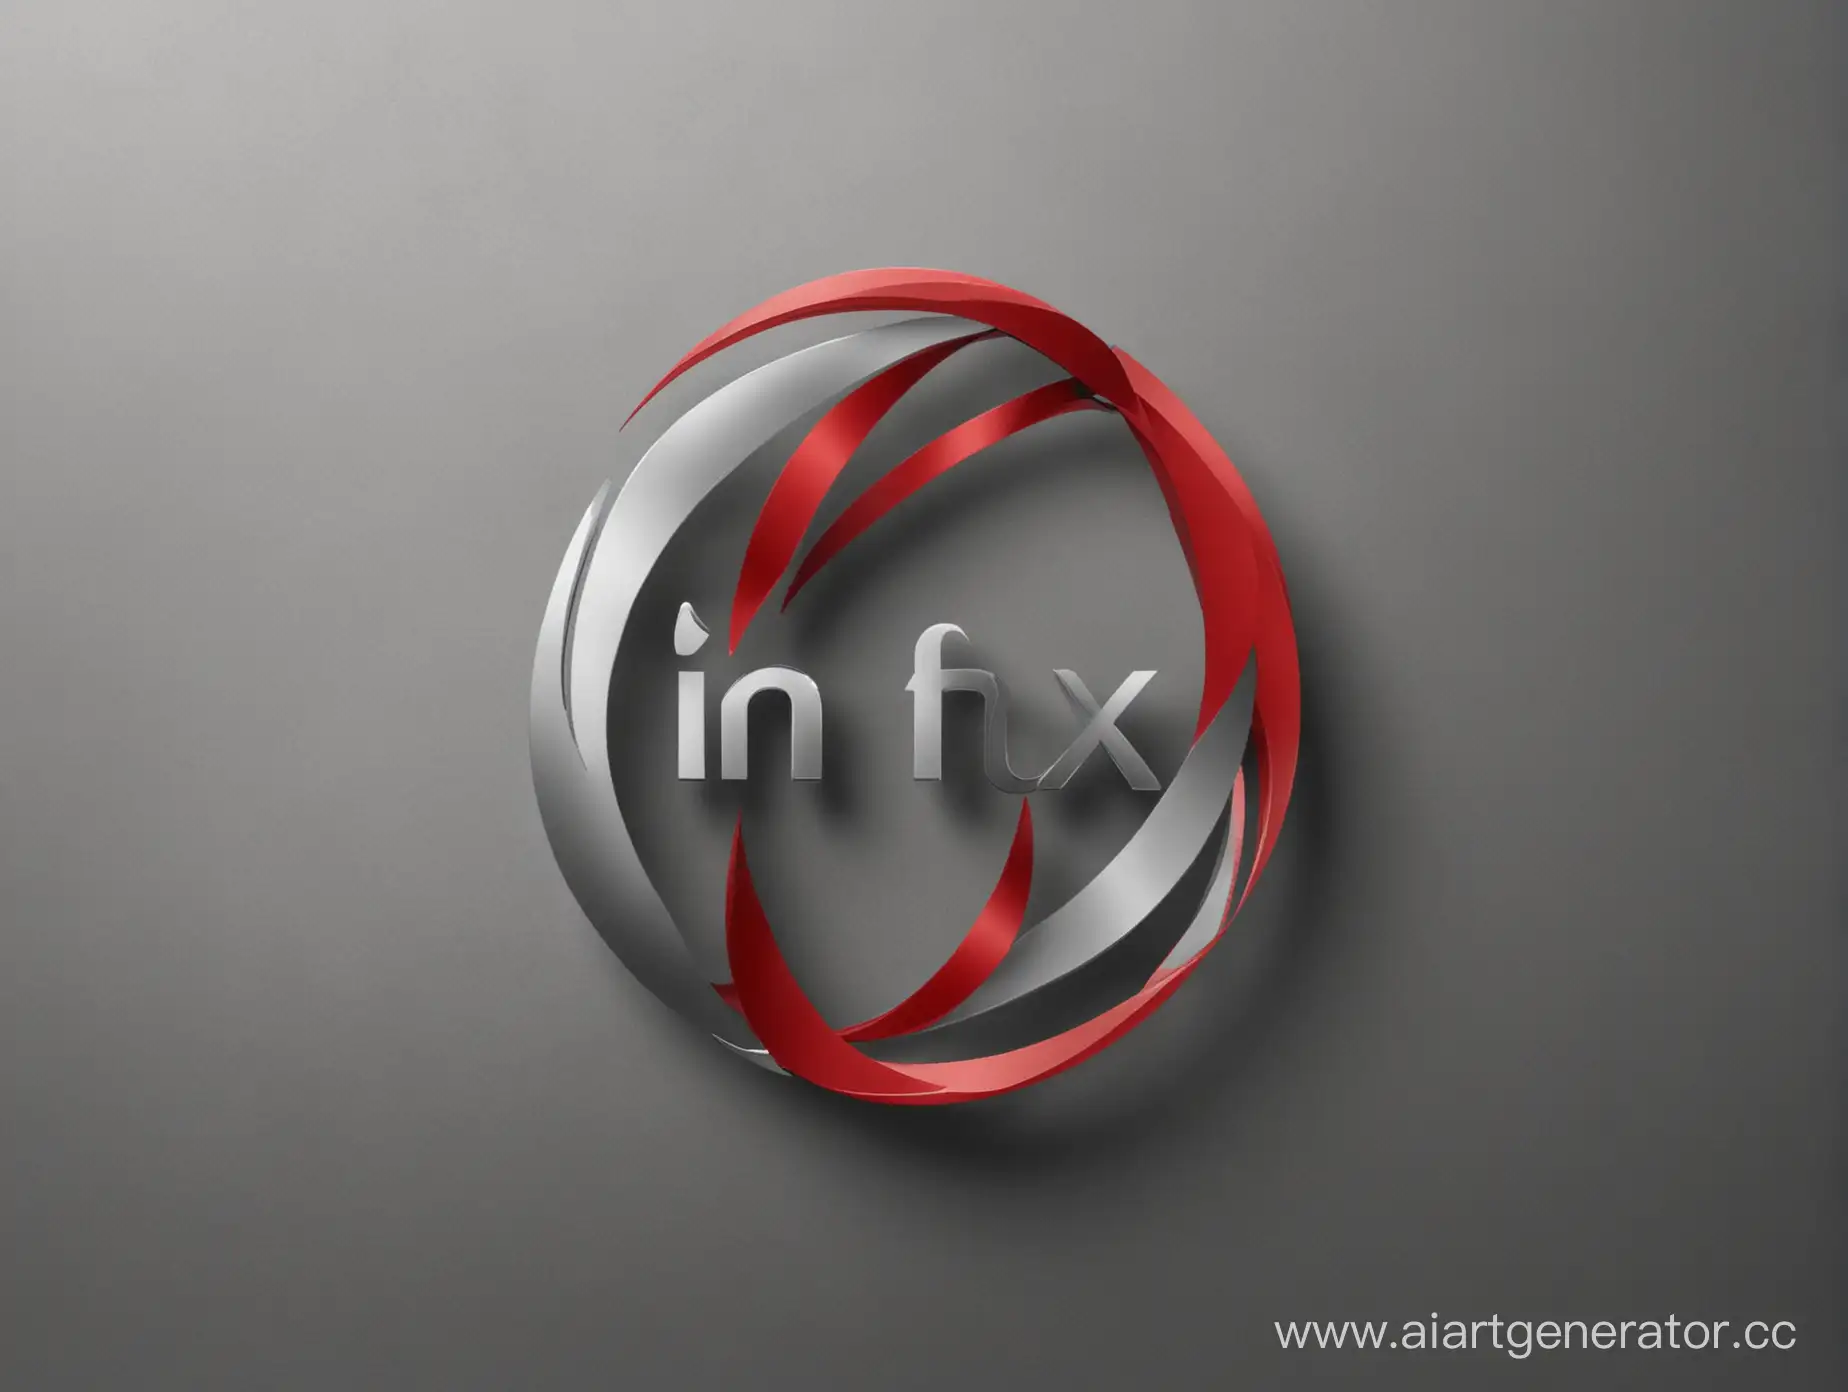 logo infinix, red and gray